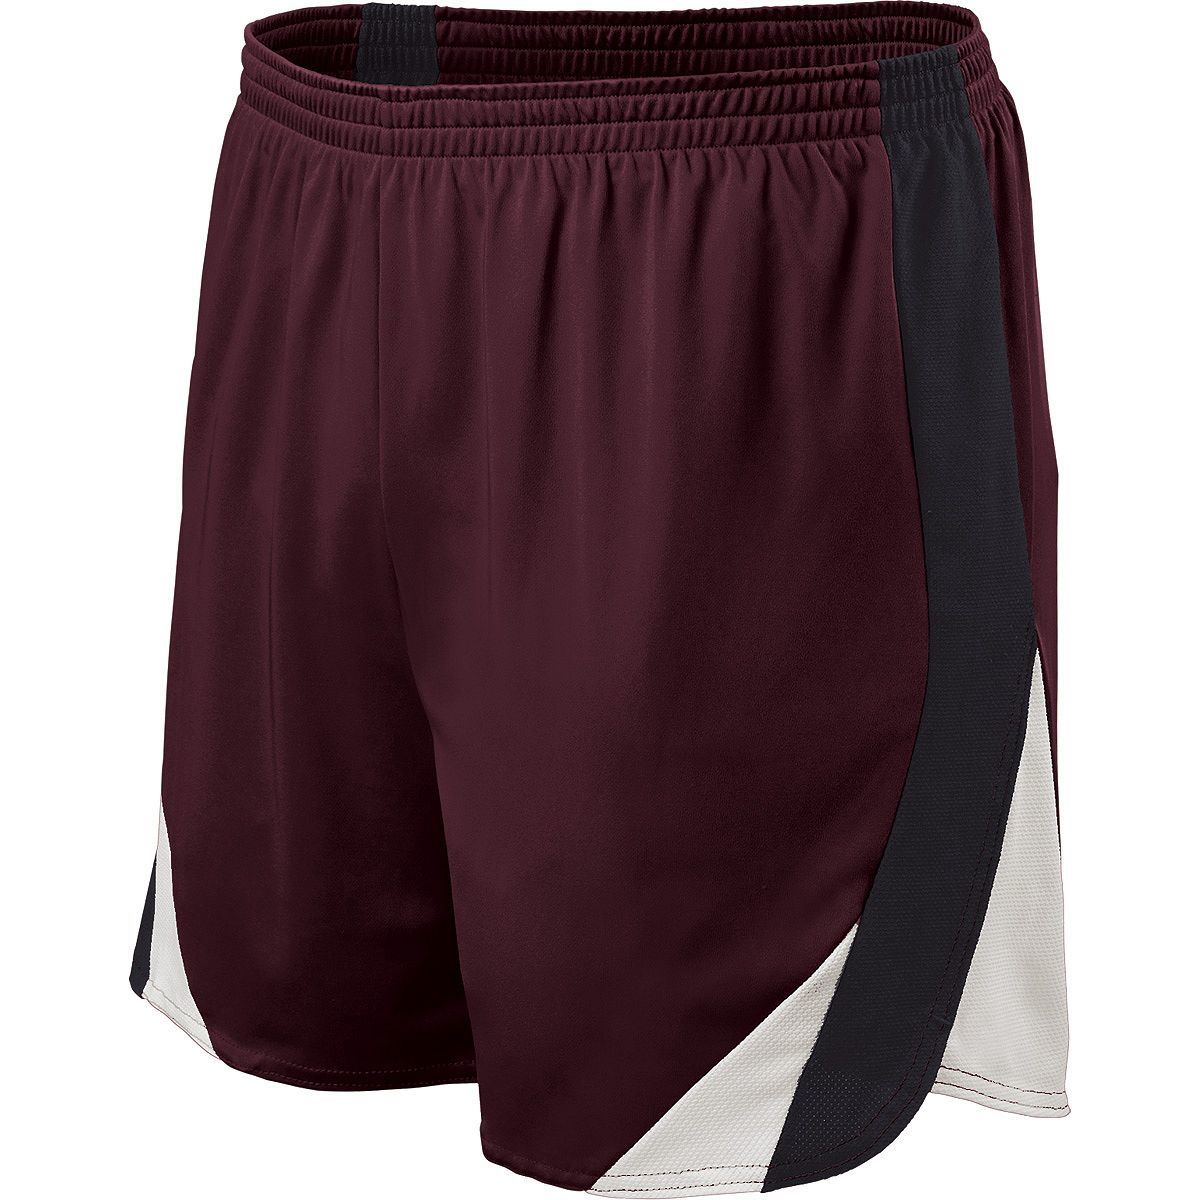 Holloway Approach Shorts in Dark Maroon/Black/White  -Part of the Adult, Adult-Shorts, Track-Field, Holloway product lines at KanaleyCreations.com